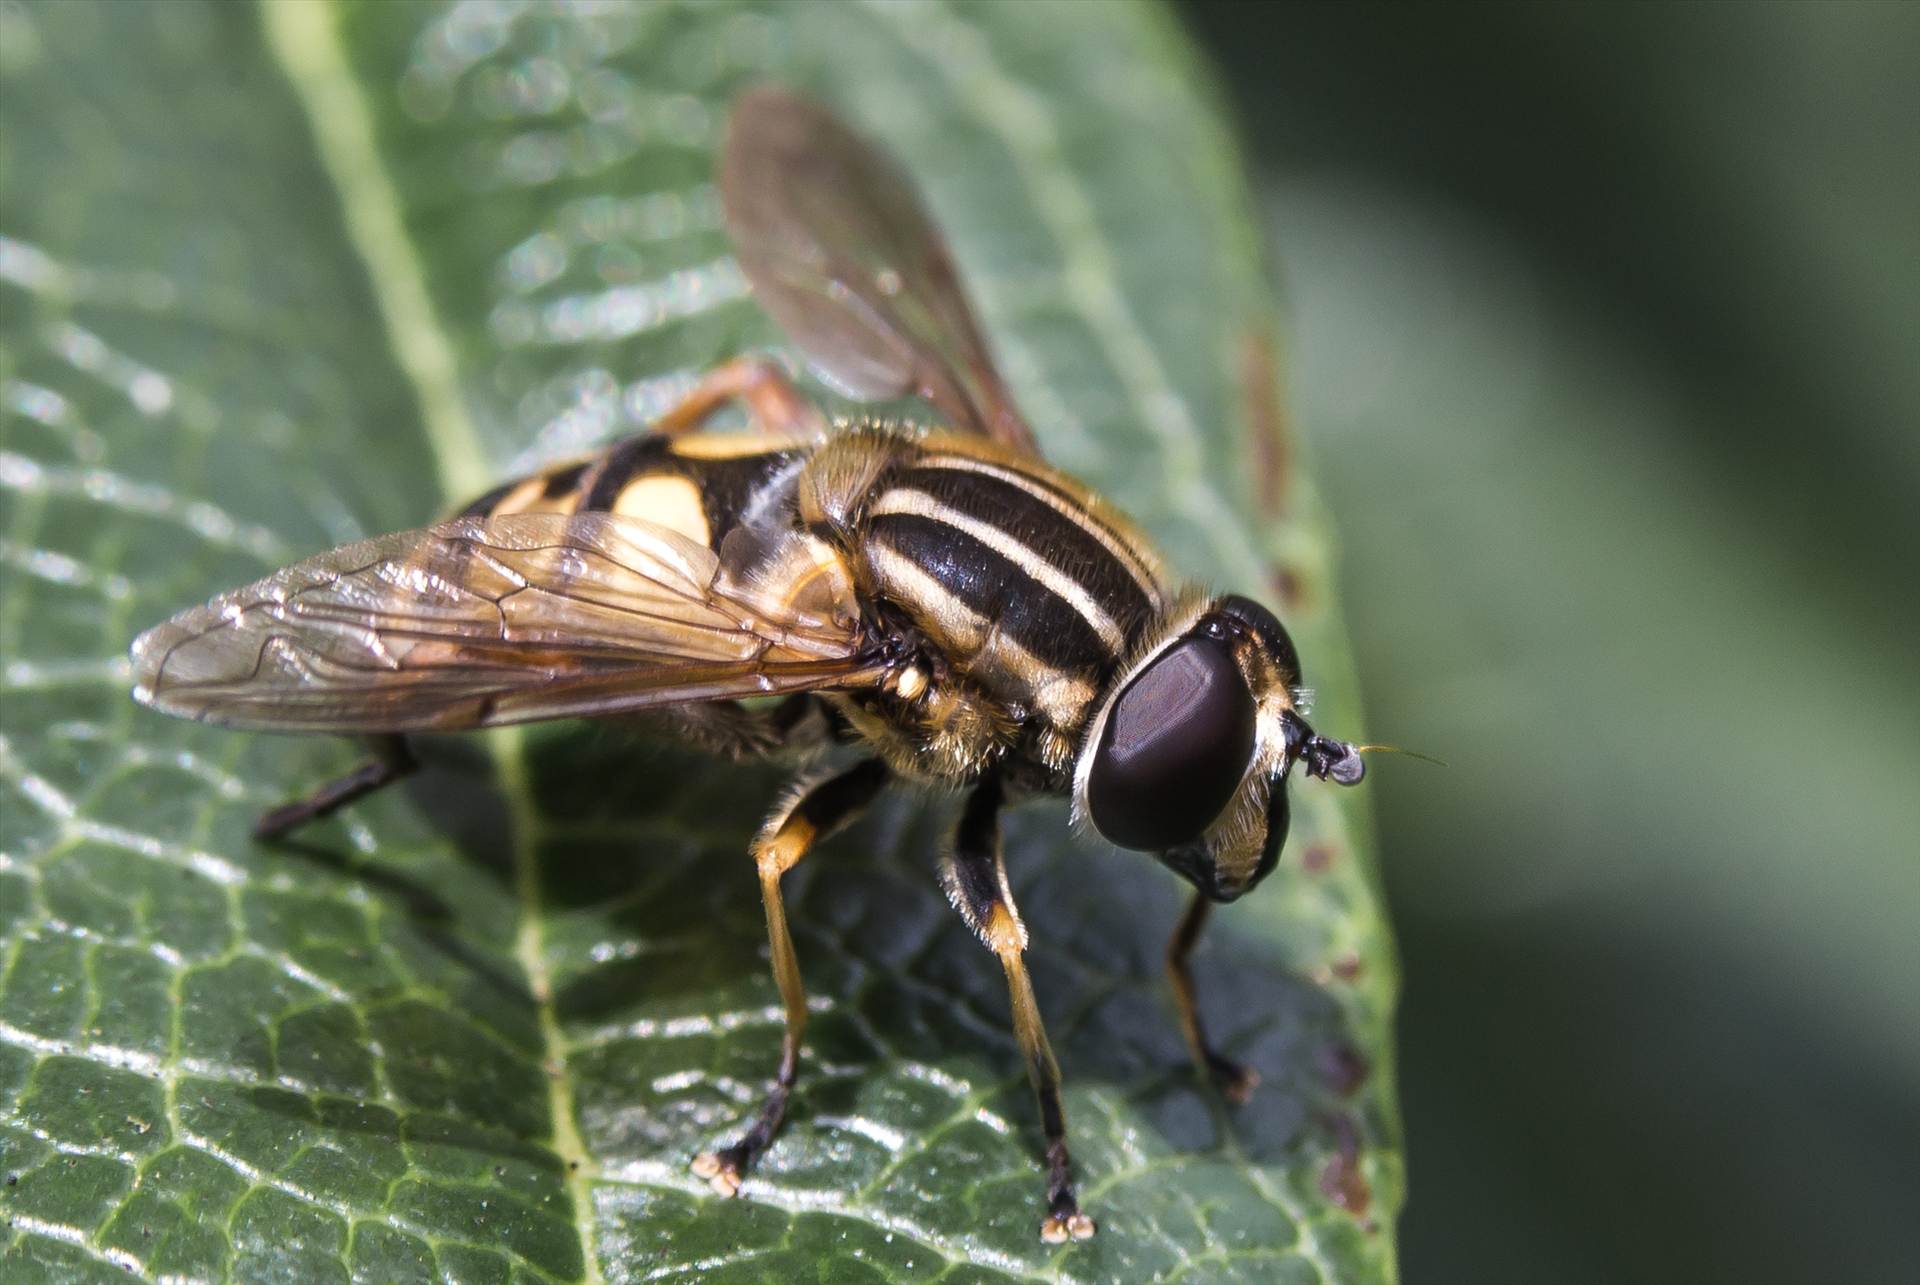 Hoverfly.jpg  by WPC-187